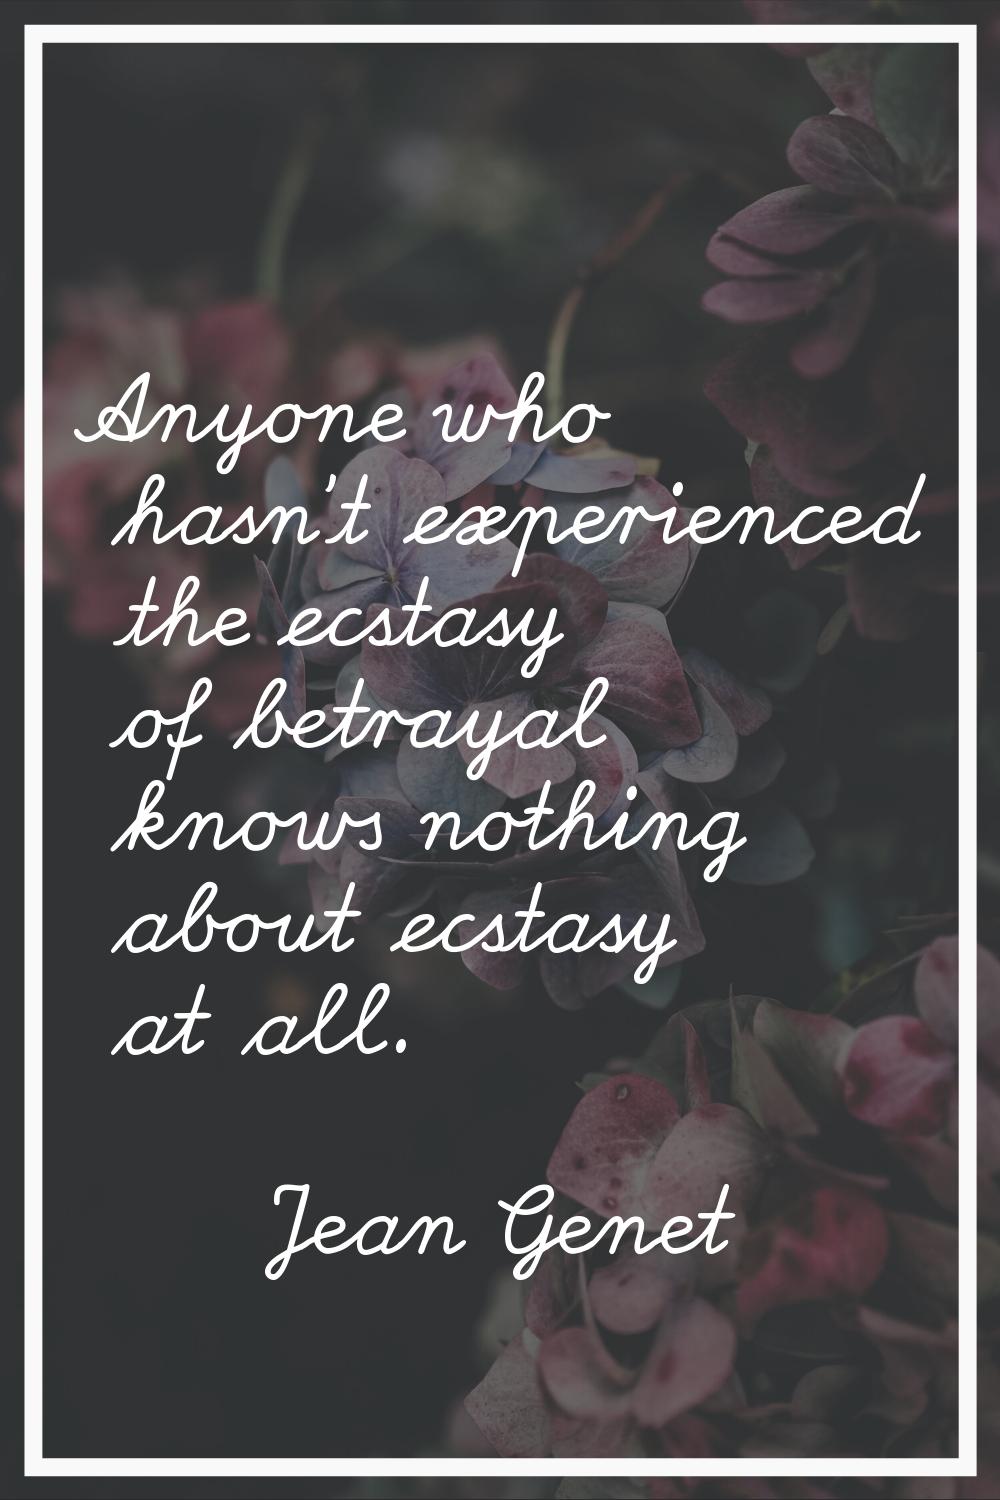 Anyone who hasn't experienced the ecstasy of betrayal knows nothing about ecstasy at all.